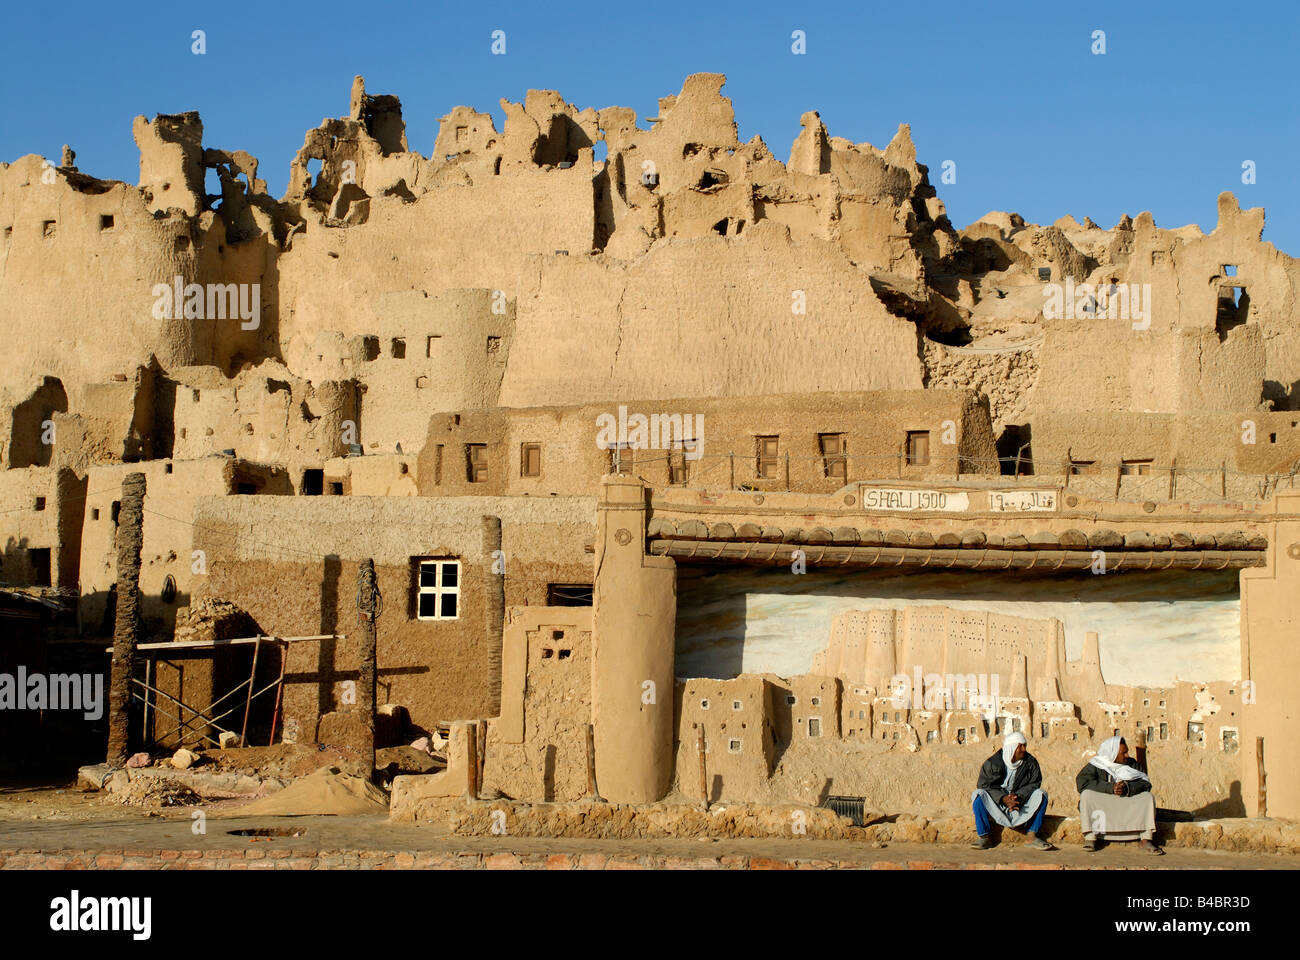 Two men sitting in front of the old town of Shiwa Egypt 2007 Stock Photo